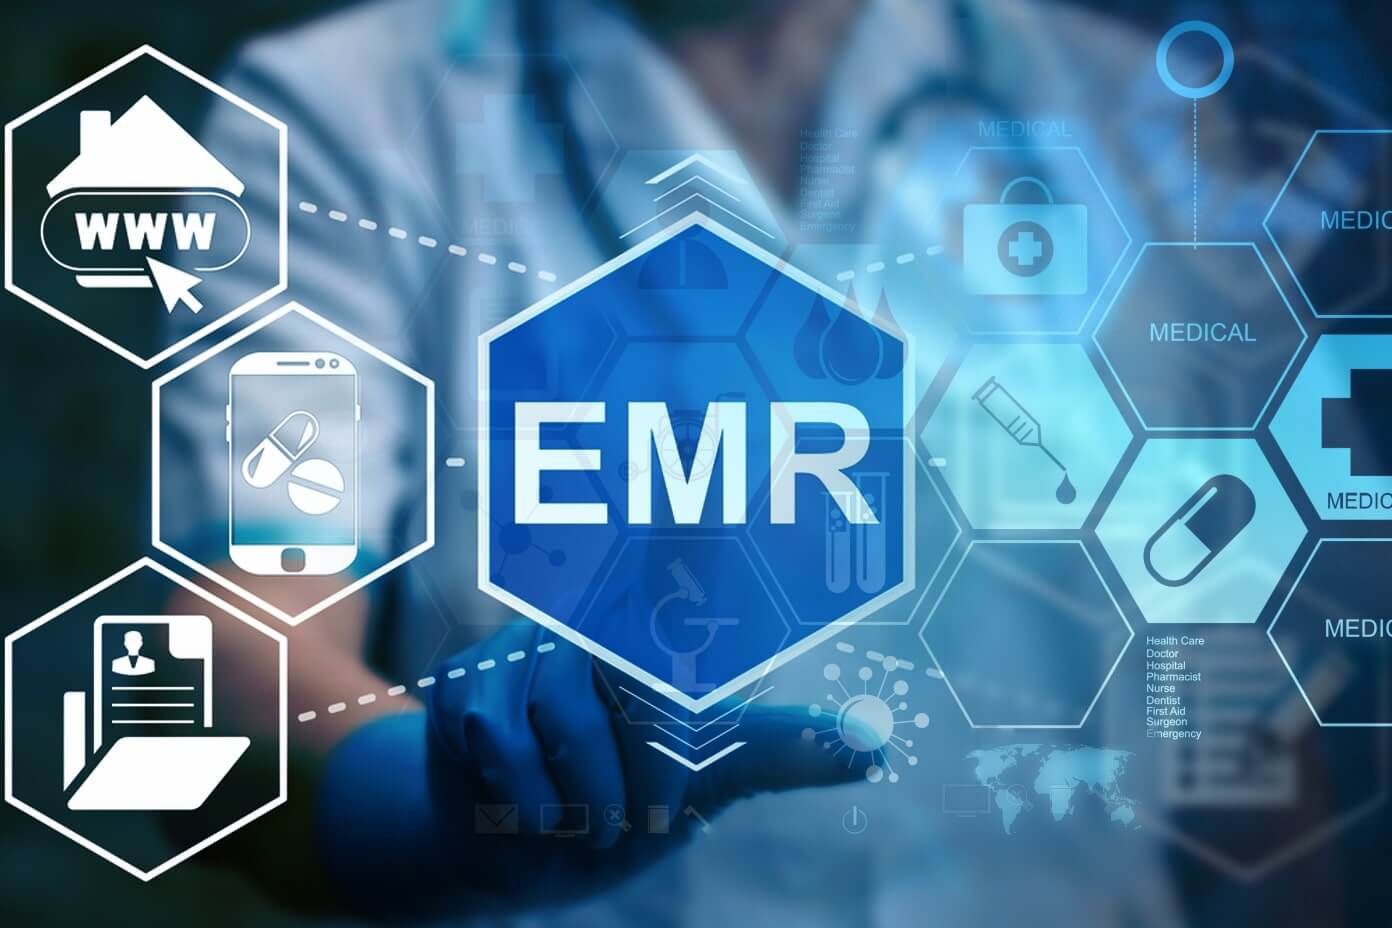 Global Electronic Medical Records (EMR) Industry